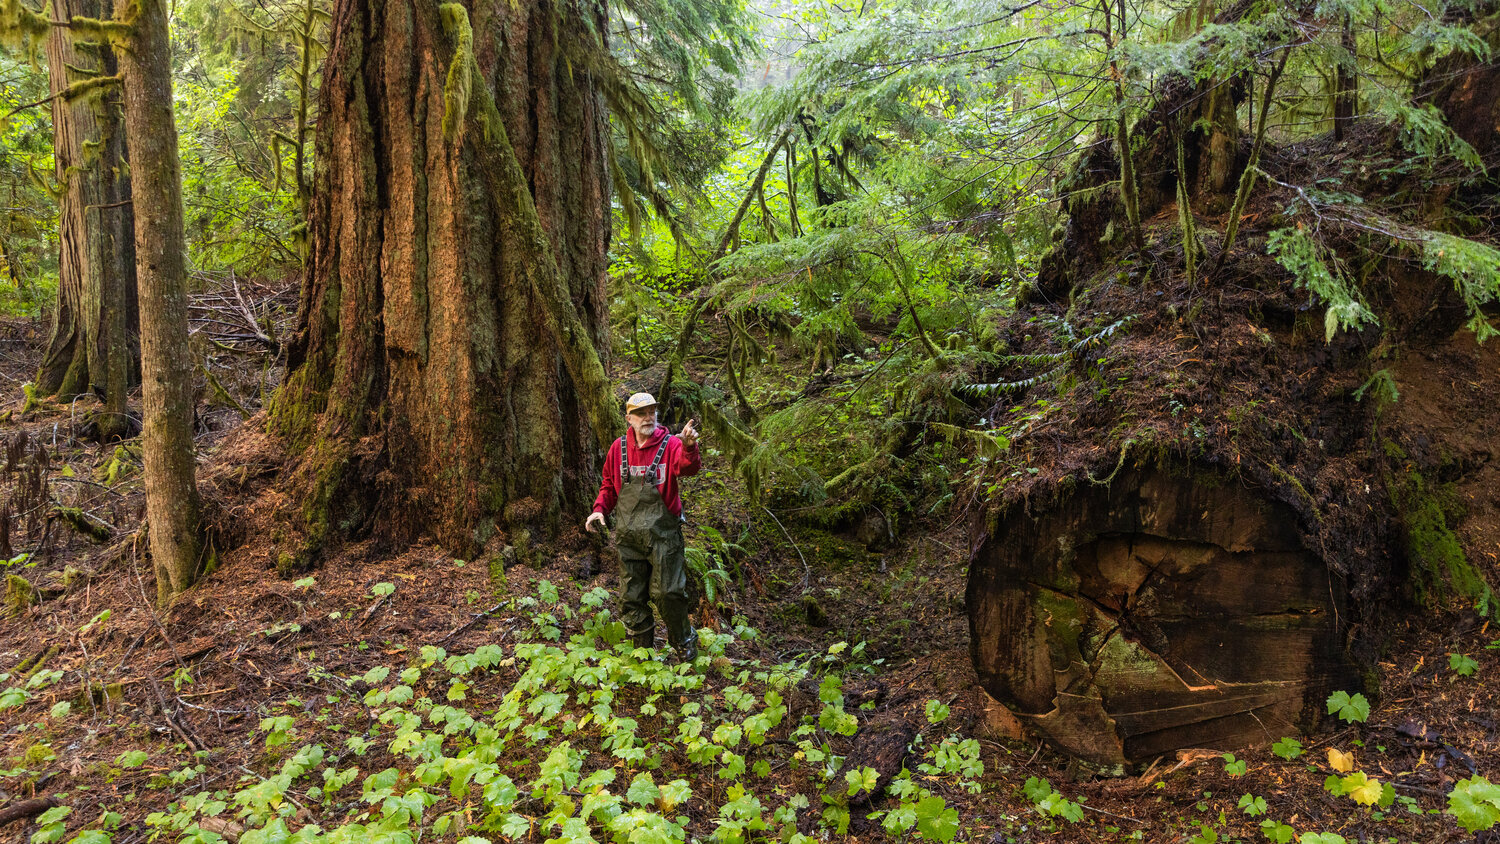 John Squires, a founding member of the Pinchot Partners, points to a large tree that was logged long ago in the Grove of the Matriarchs on Thursday, Sept. 28, in the Gifford Pinchot National Forest.